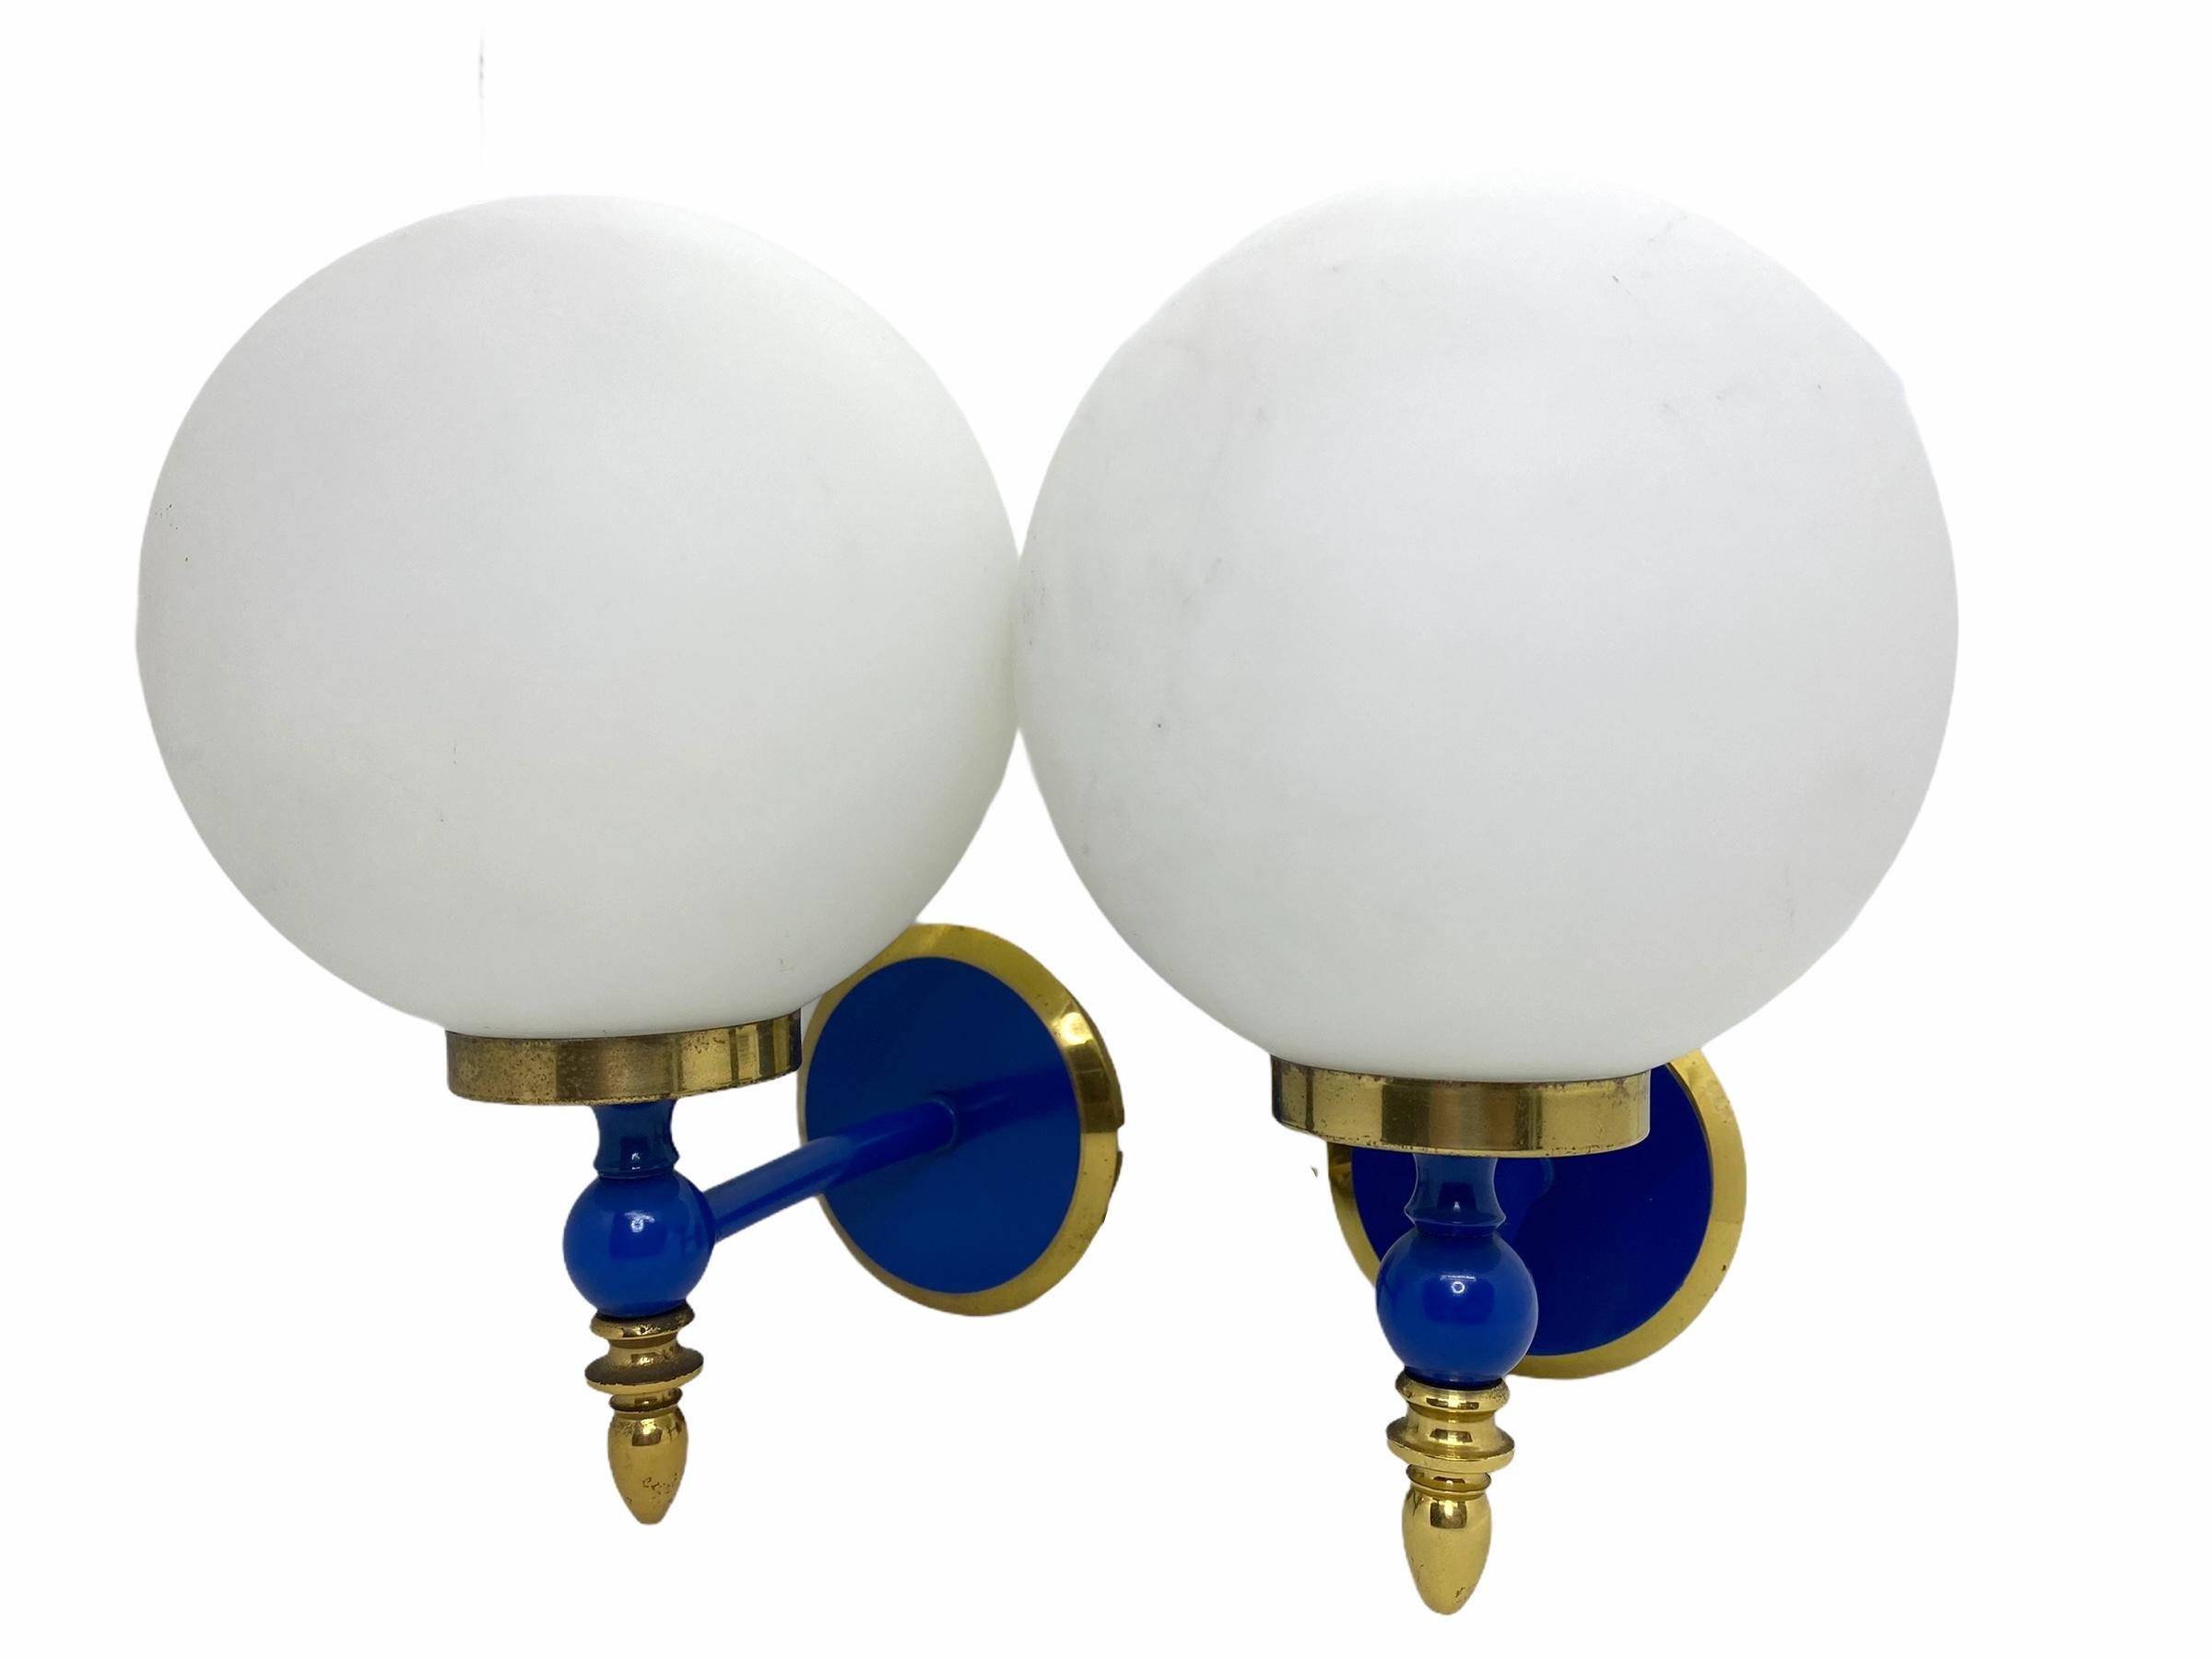 Pair of Art Deco style blue lacquered brass and milk glass sconces, Germany, each fixture requires a European E14 candelabra bulb, up to 60 watts. The wall lights have a beautiful brass frame with blue lacquered parts and give each room a eclectic